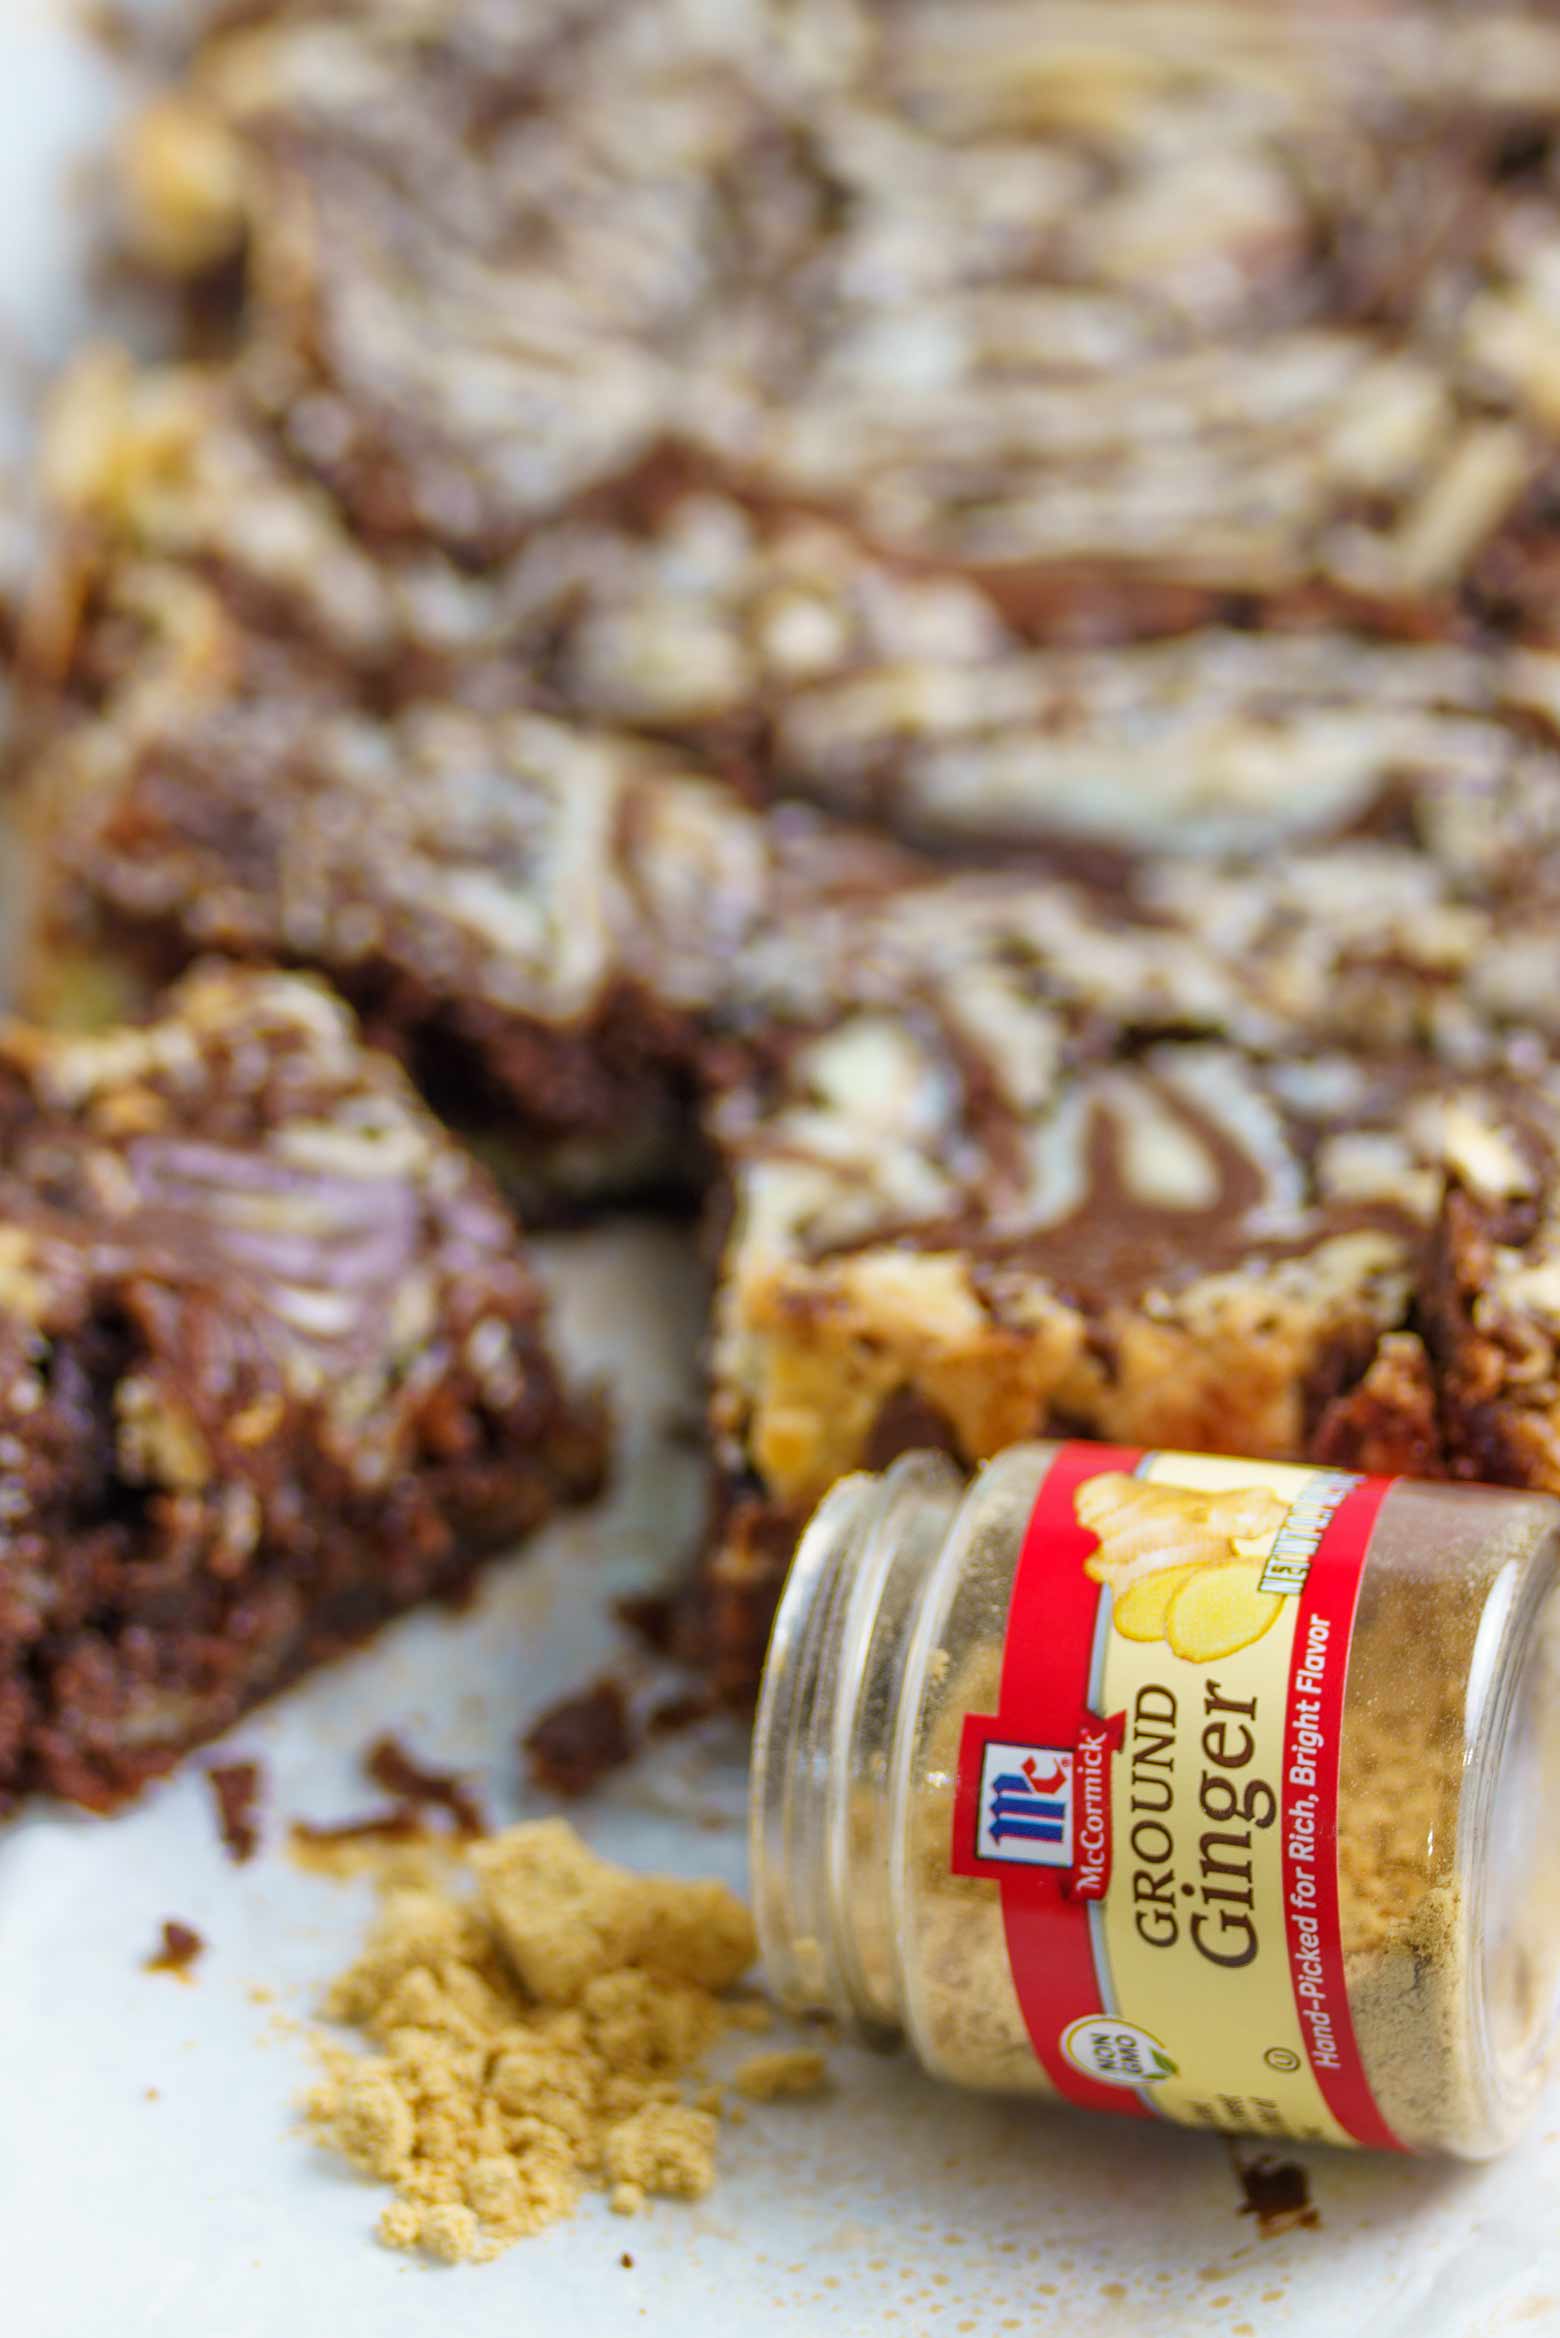 Ground ginger in chocolate ooey gooey bars for the holidays